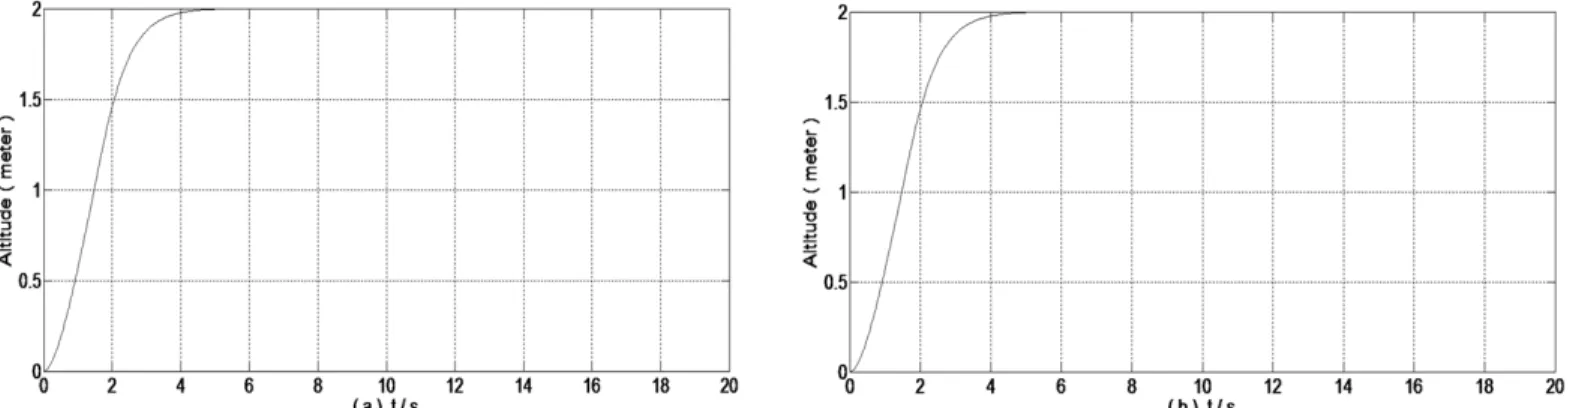 Figure  7.  Response  of  altitude  subsystem  of  a  quadrotor  with  proposed  backstepping  based  sliding  mode  control  (a)  Controlled  response of altitude without external disturbances (b) Controlled response of altitude with external disturbance.